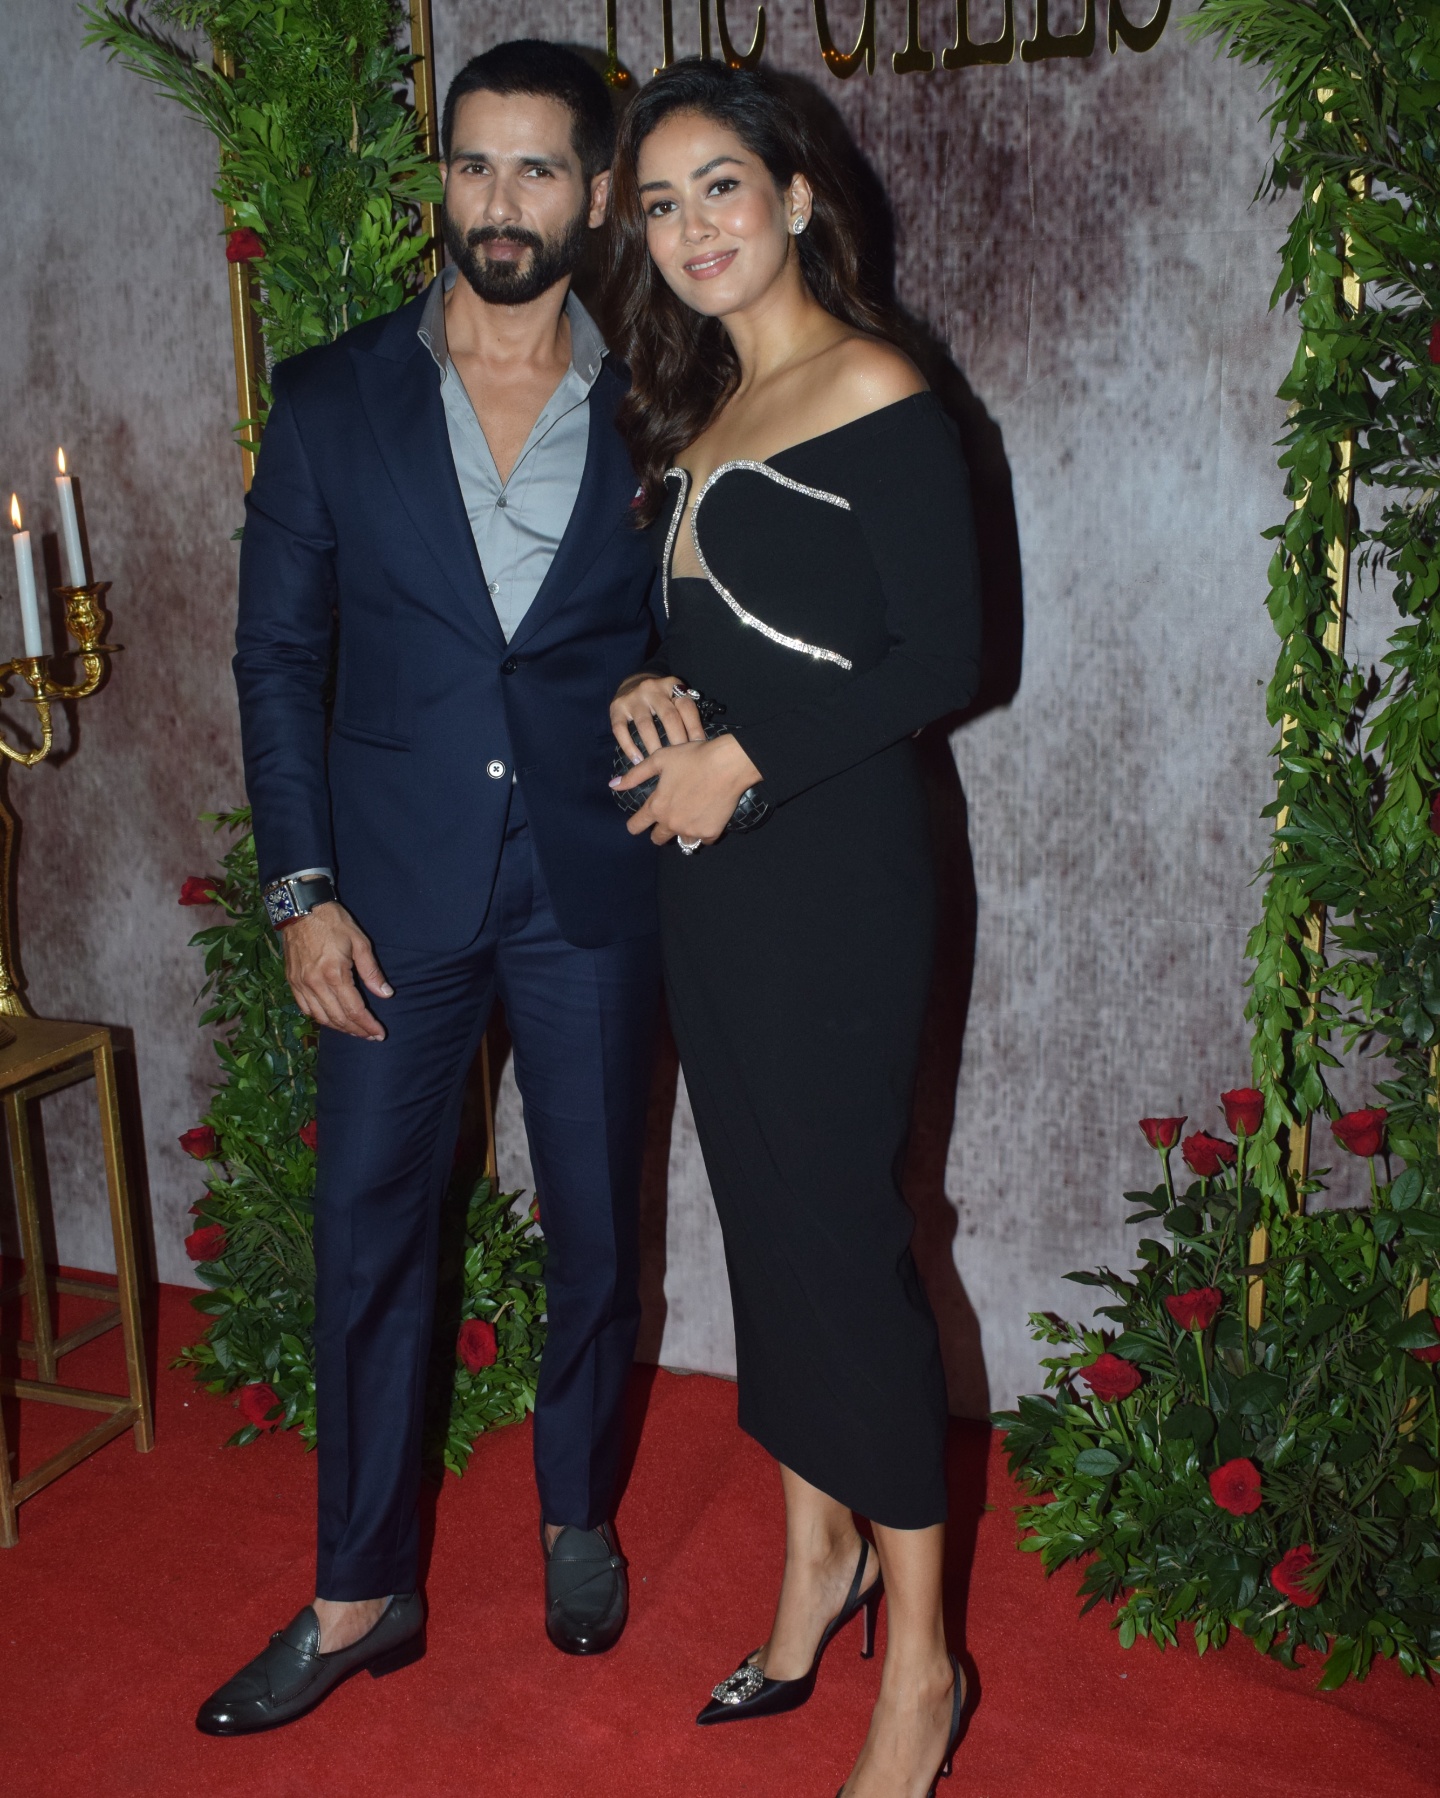 Shahid Kapoor and wife Mira Rajput at Aman Gill's wedding reception party